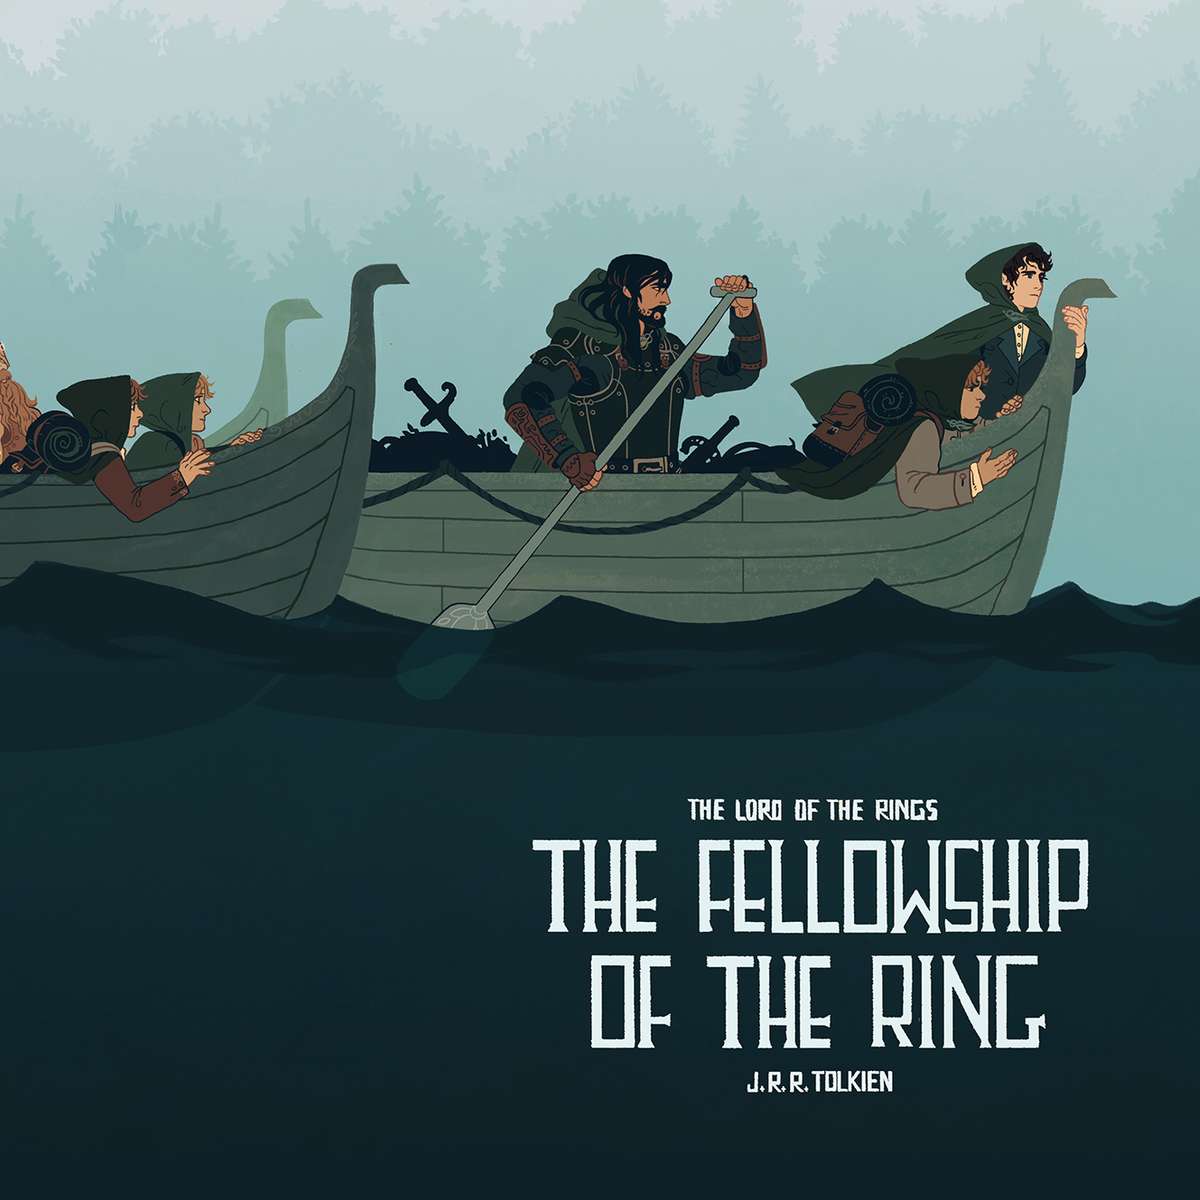 The Fellowship of the Ring online puzzle